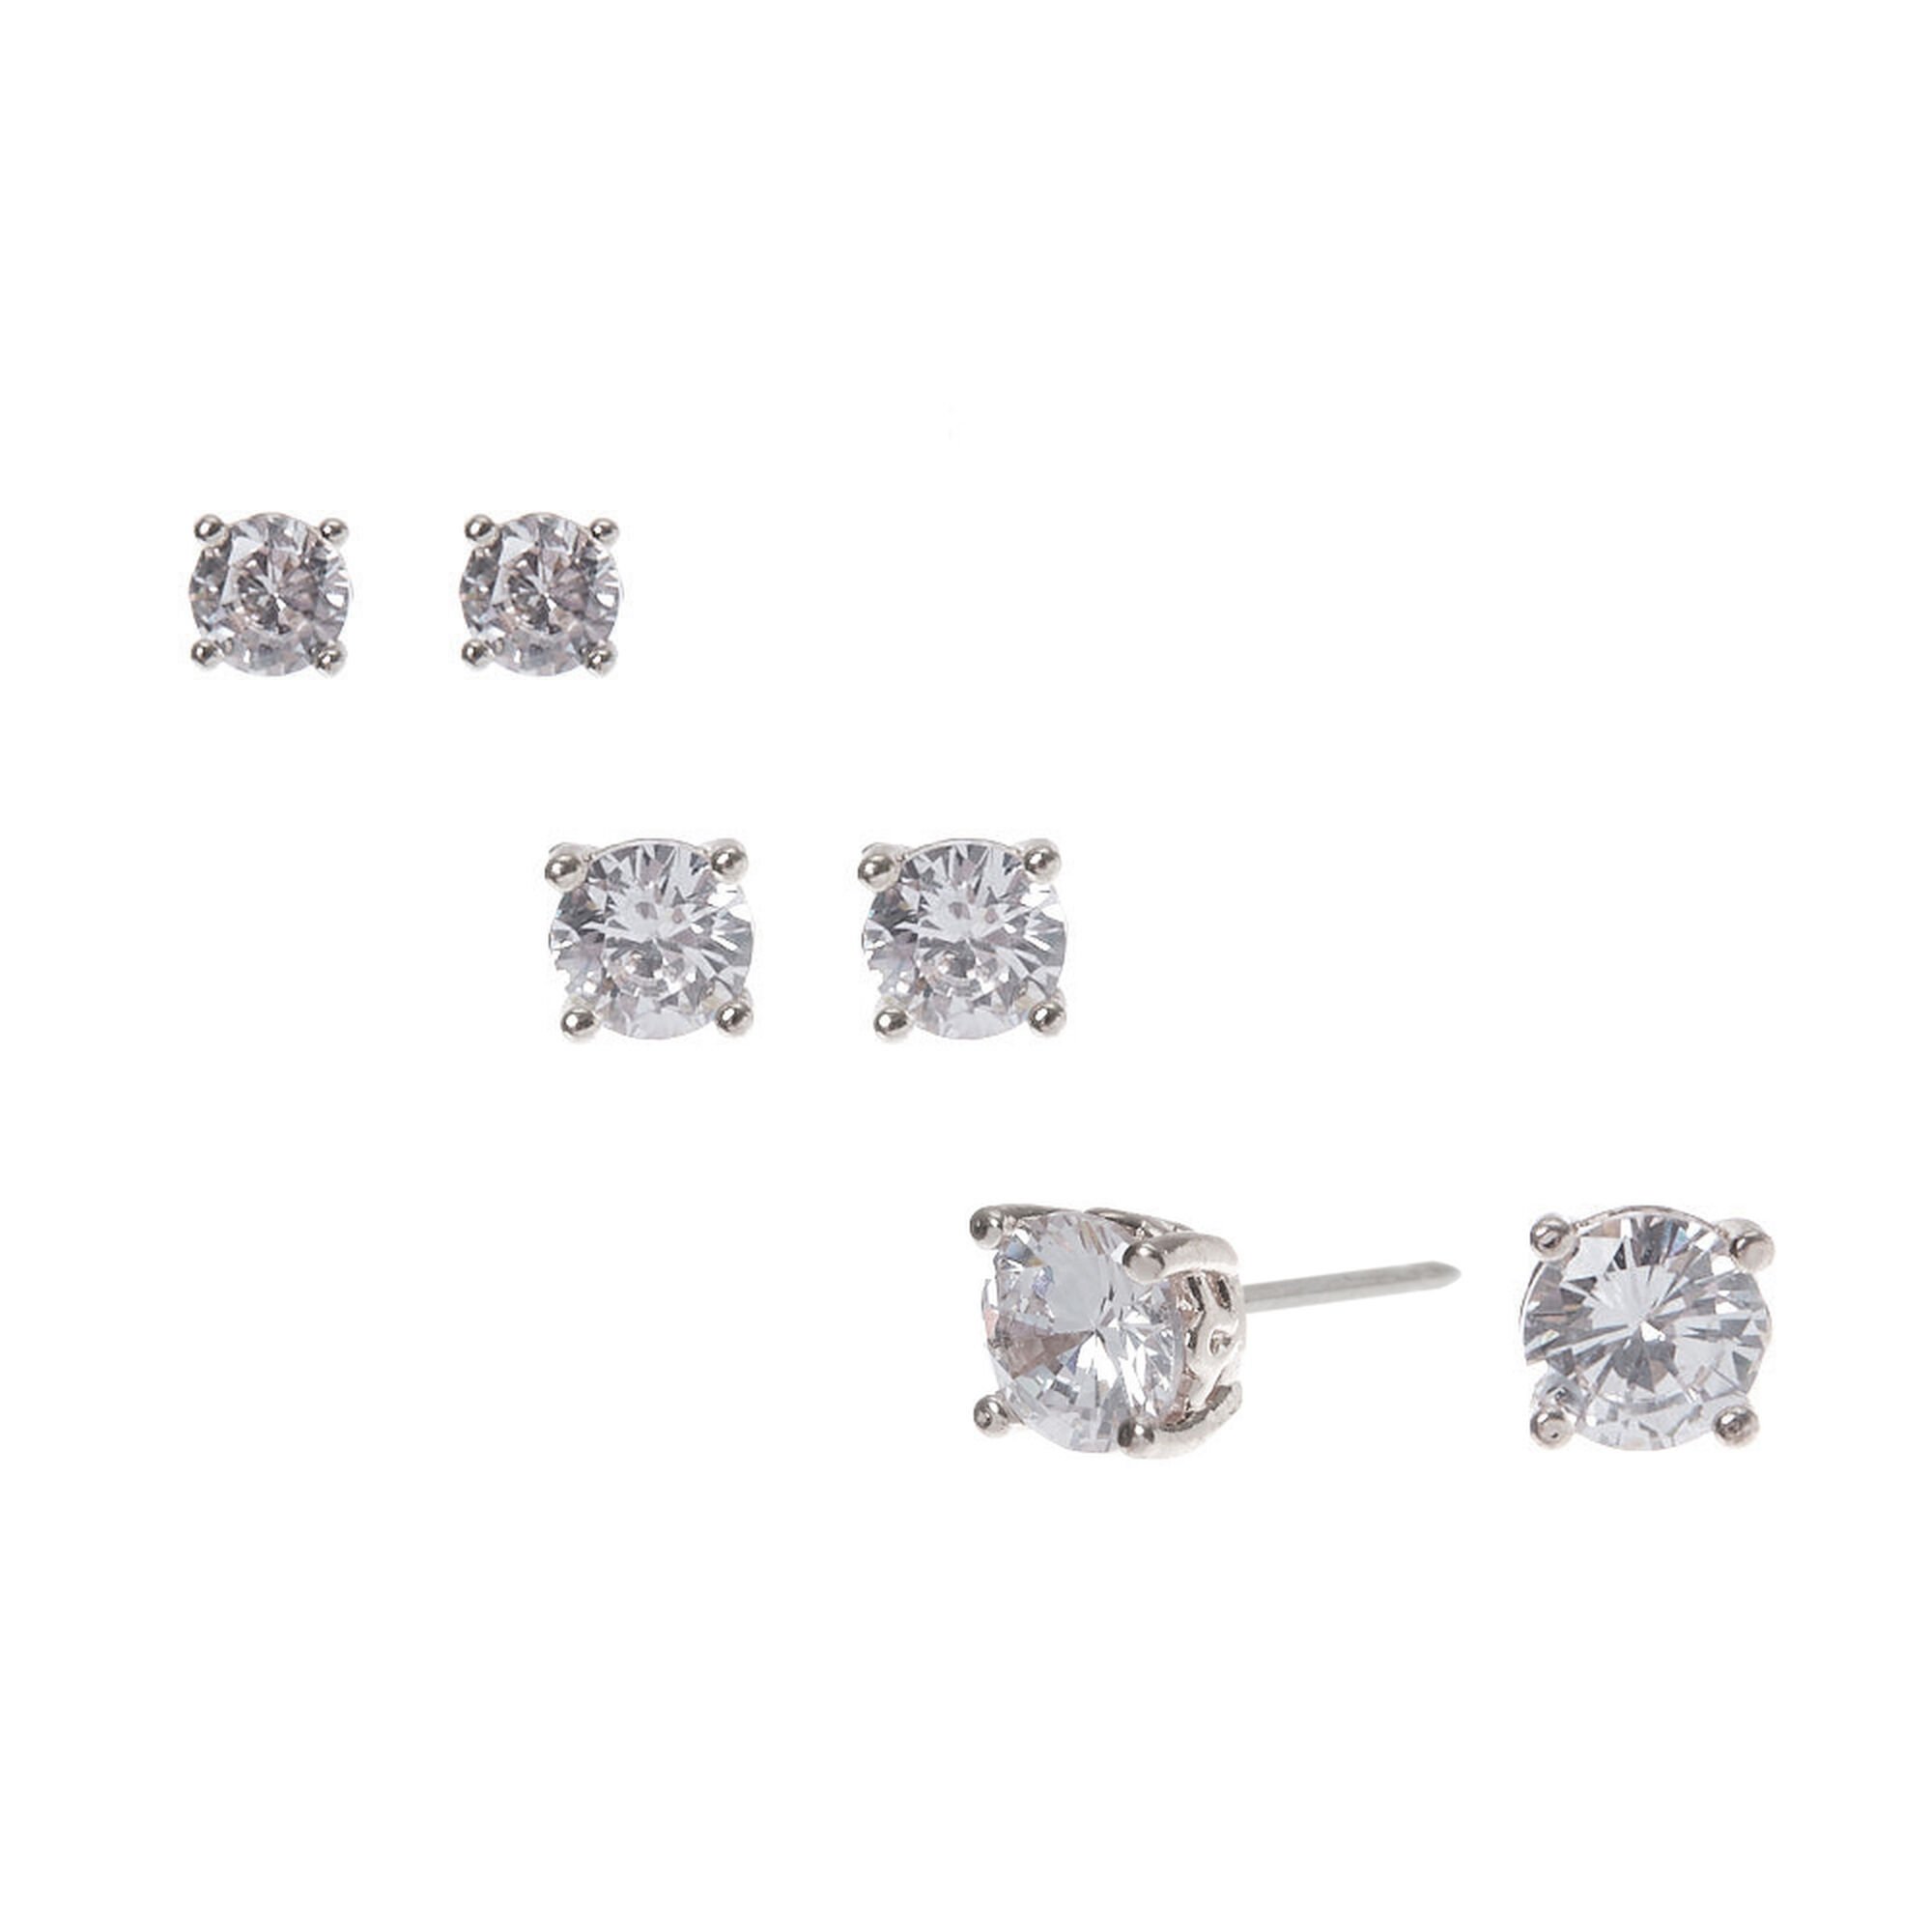 View Claires Tone Cubic Zirconia Round Stud Earrings 4MM 5MM 6MM Silver information